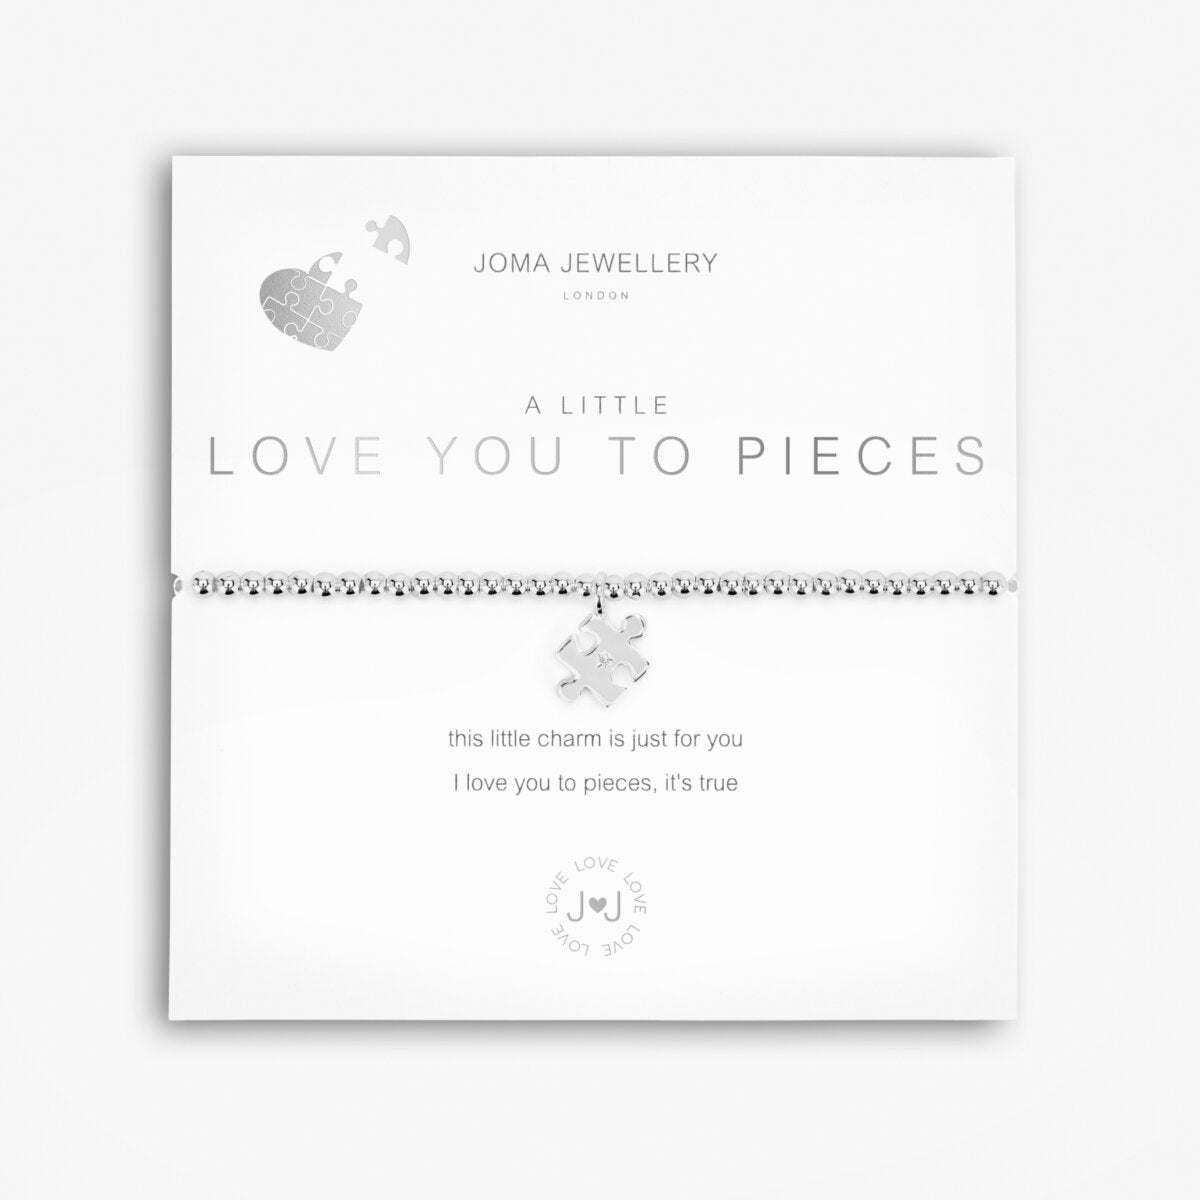 Joma Jewellery 'A Little' Love You to Pieces